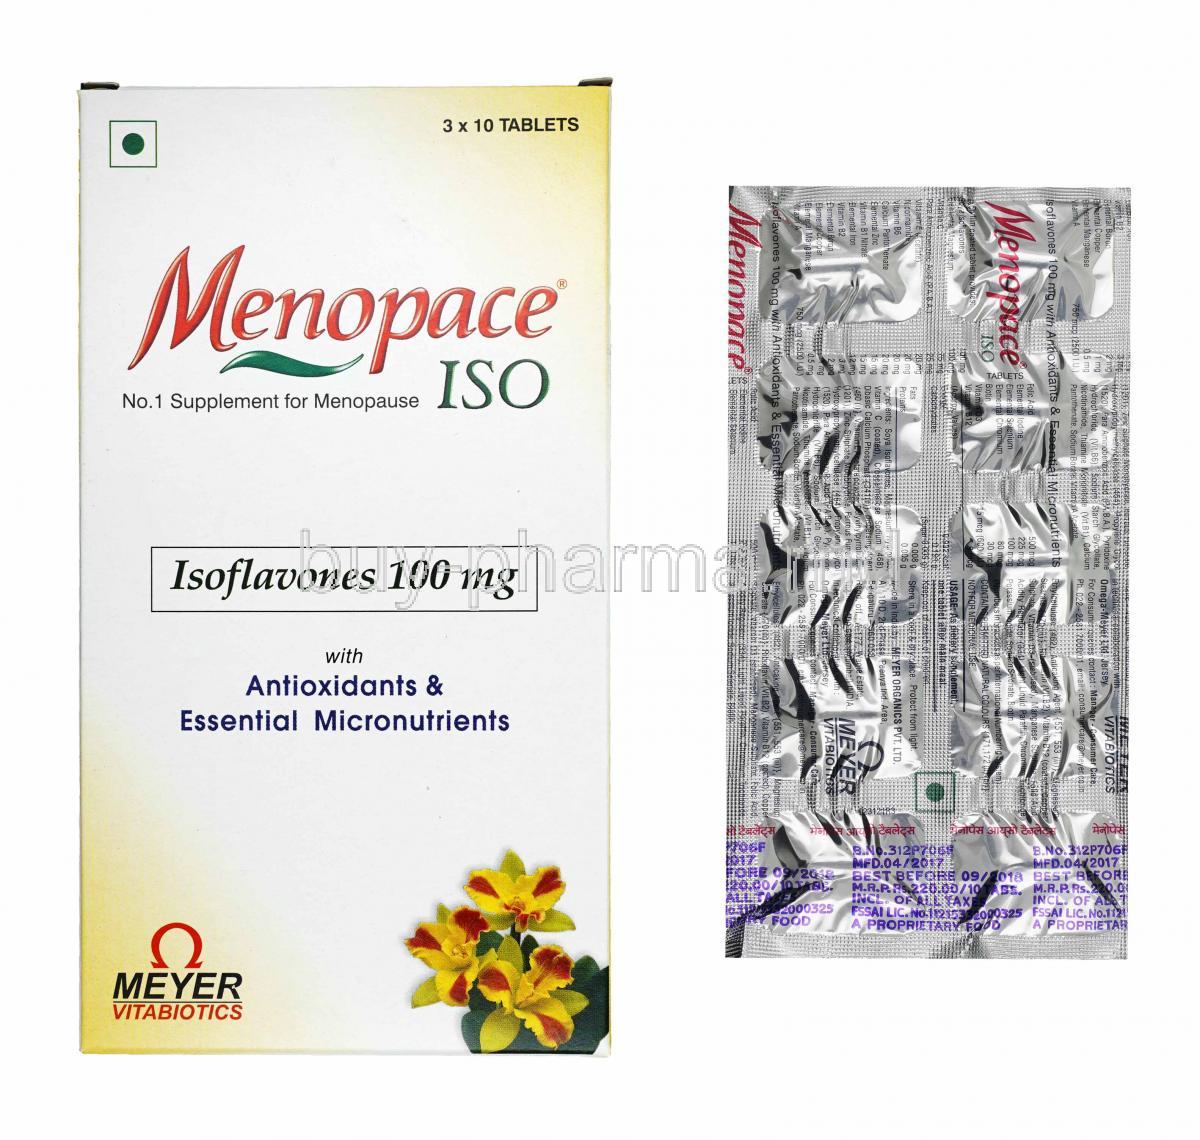 Menopace ISO box and tablets